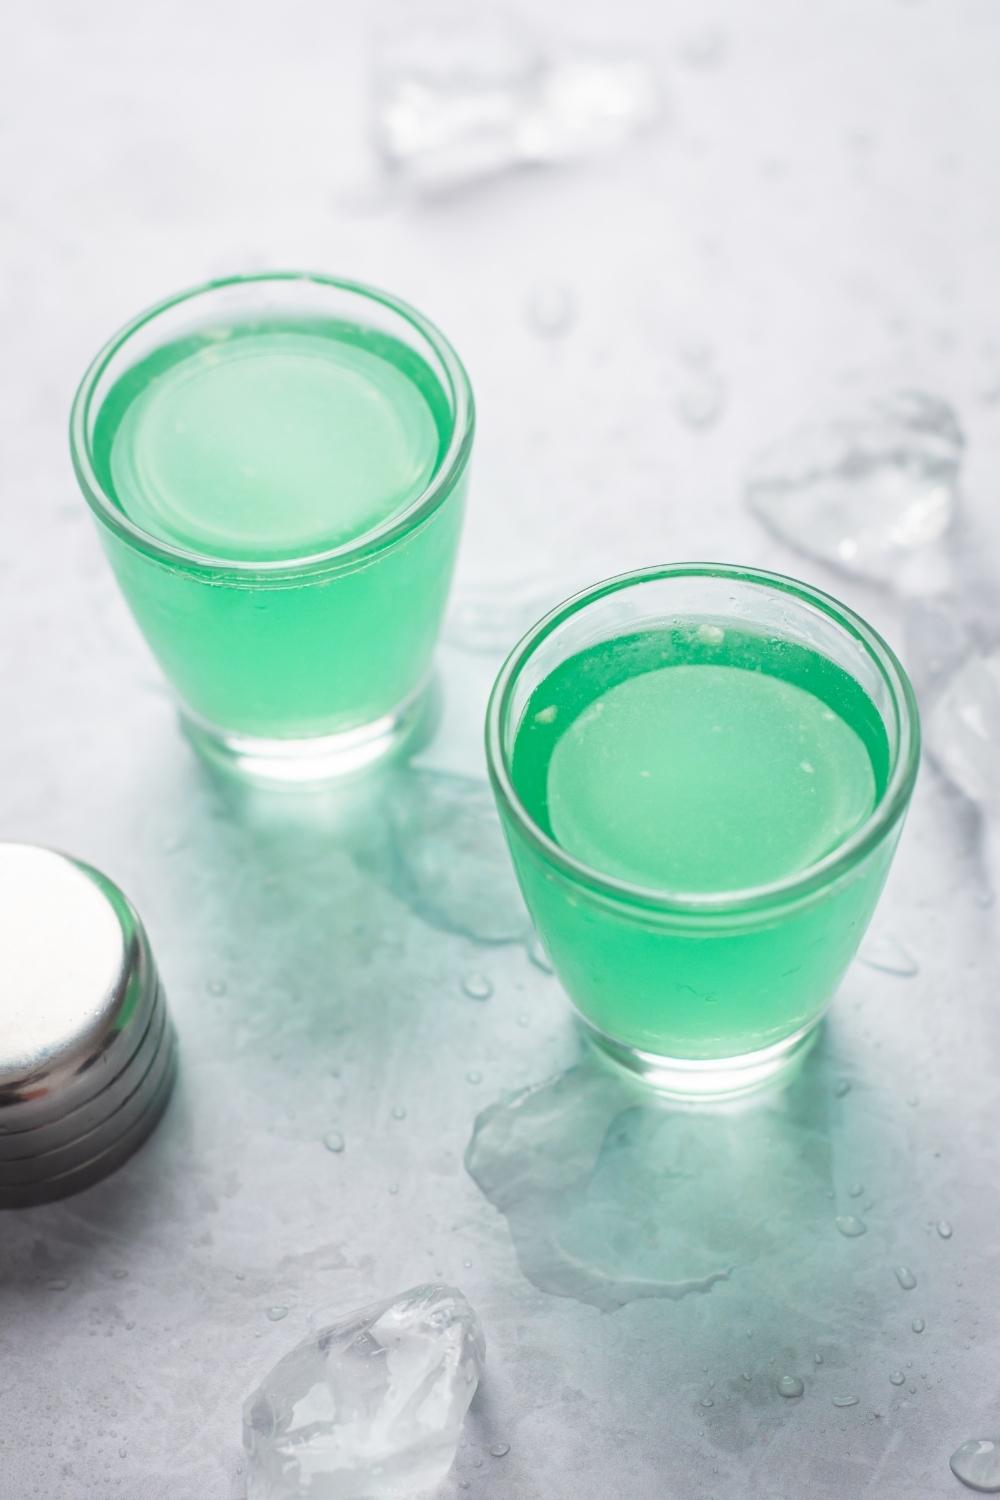 An overhead view of two marijuana shots in shot glasses. Ice is on the countertop surrounding the glasses.